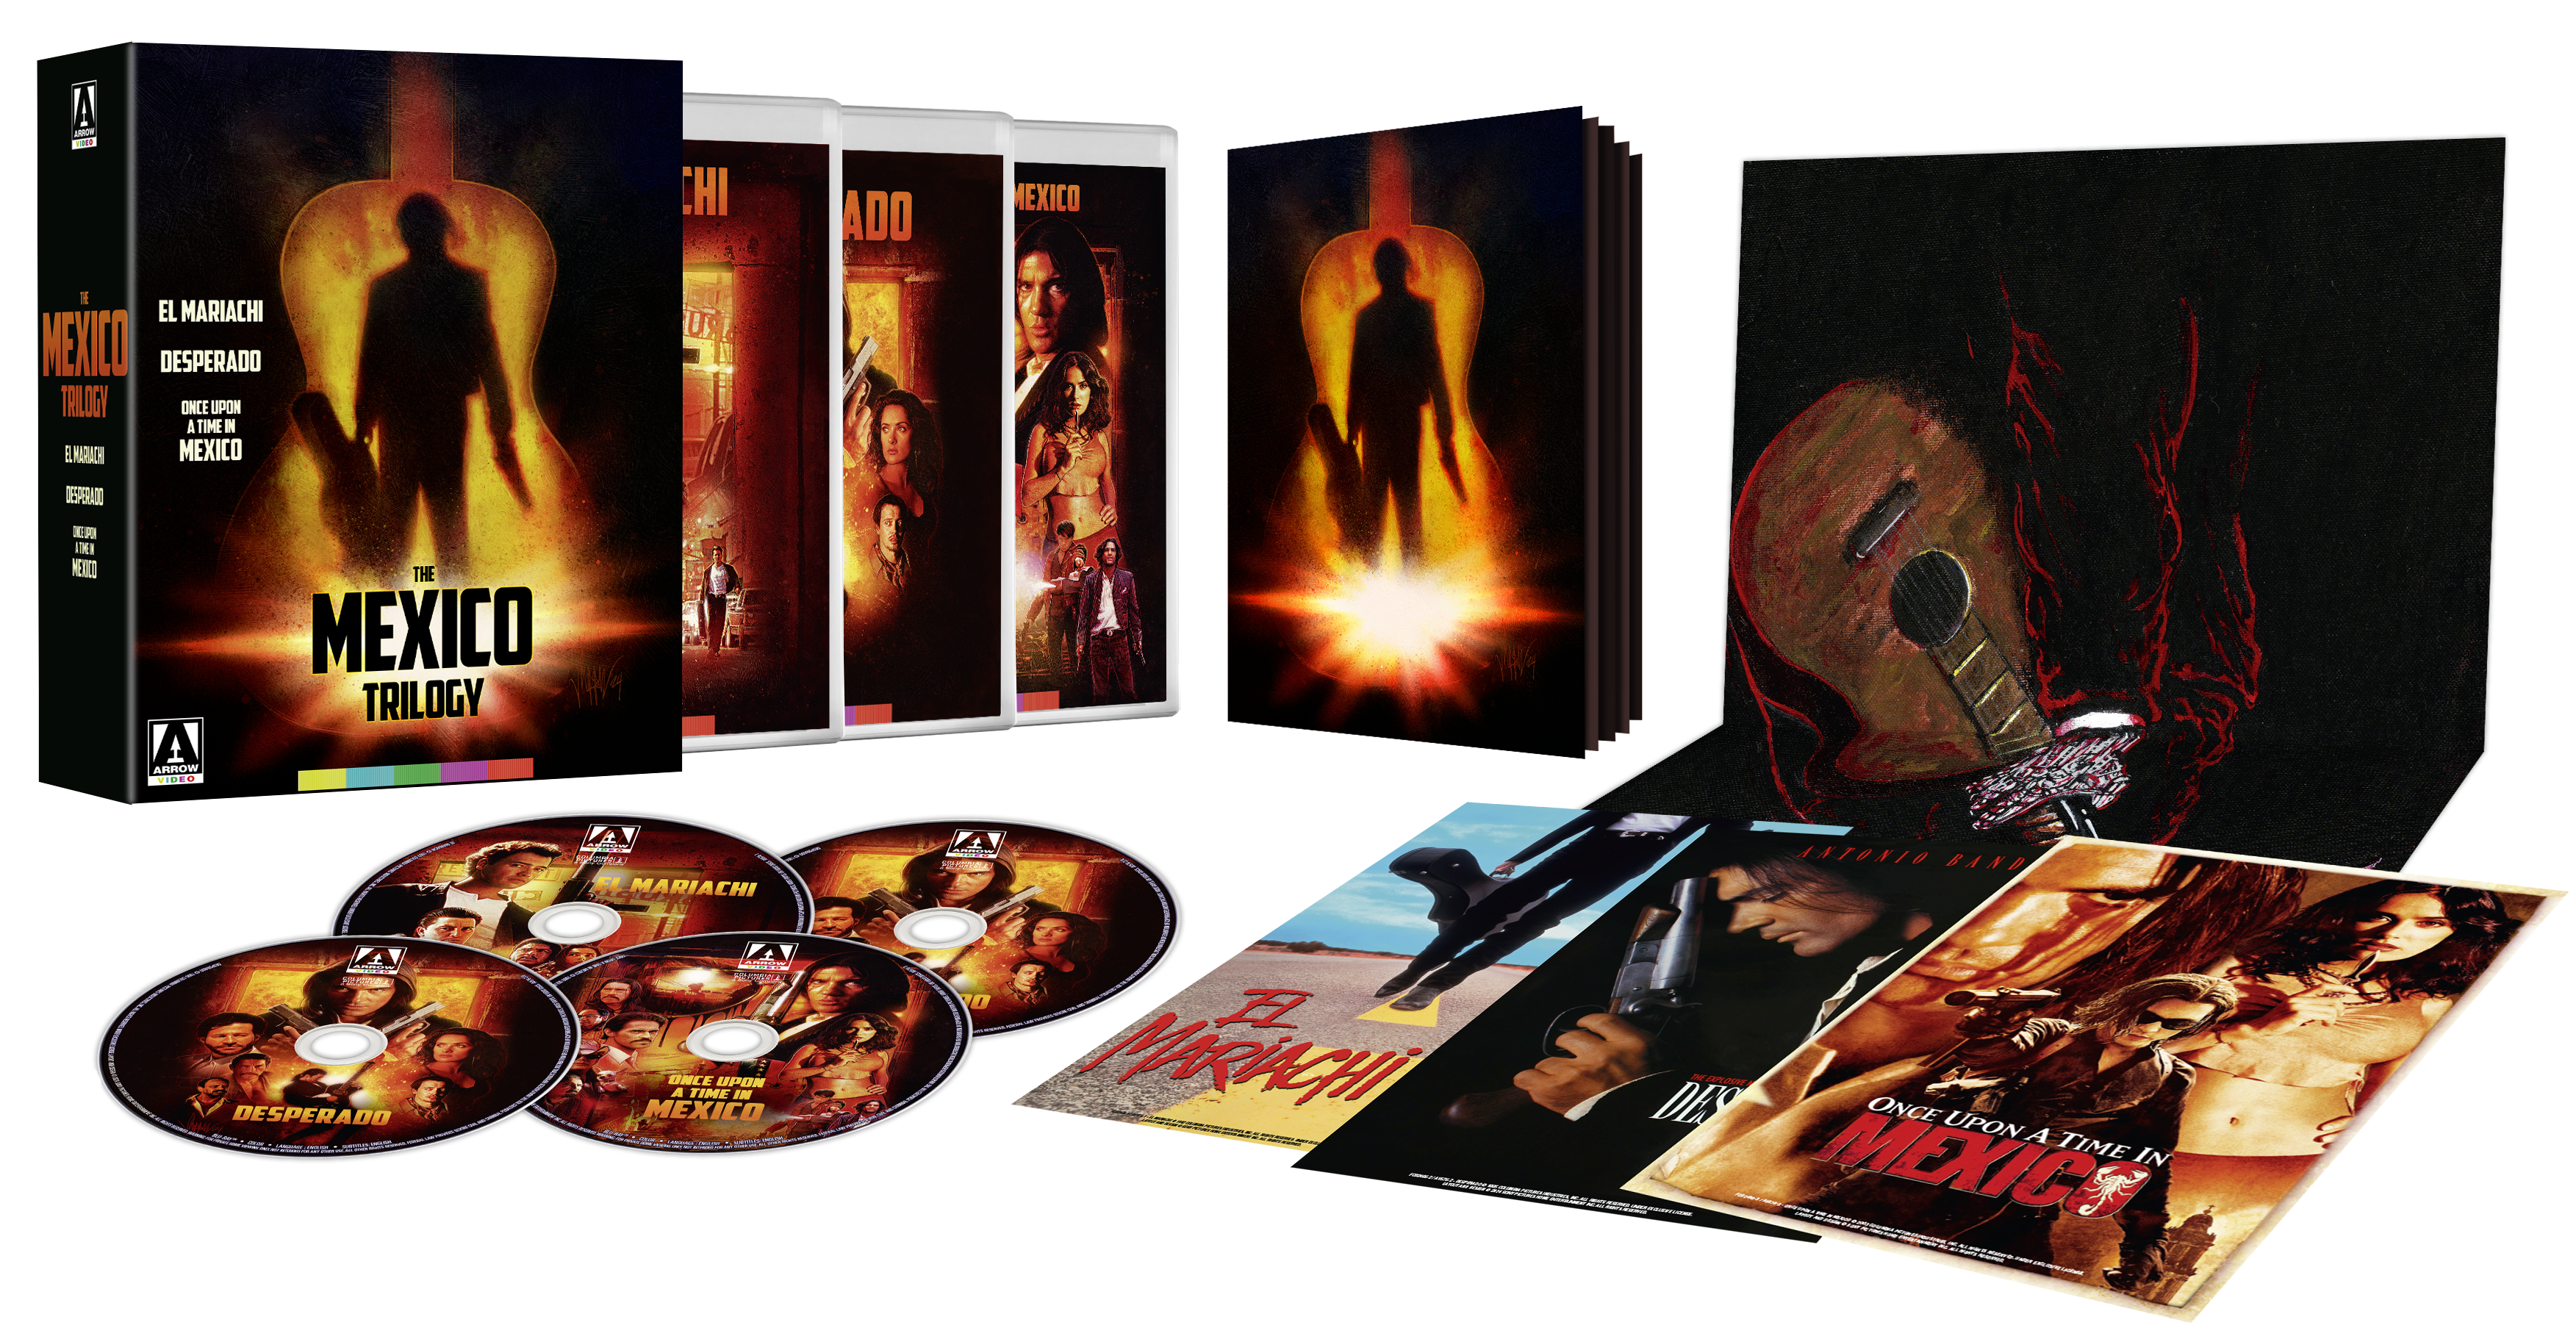 THE MEXICO TRILOGY (LIMITED EDITION) 4K UHD/BLU-RAY [PRE-ORDER]